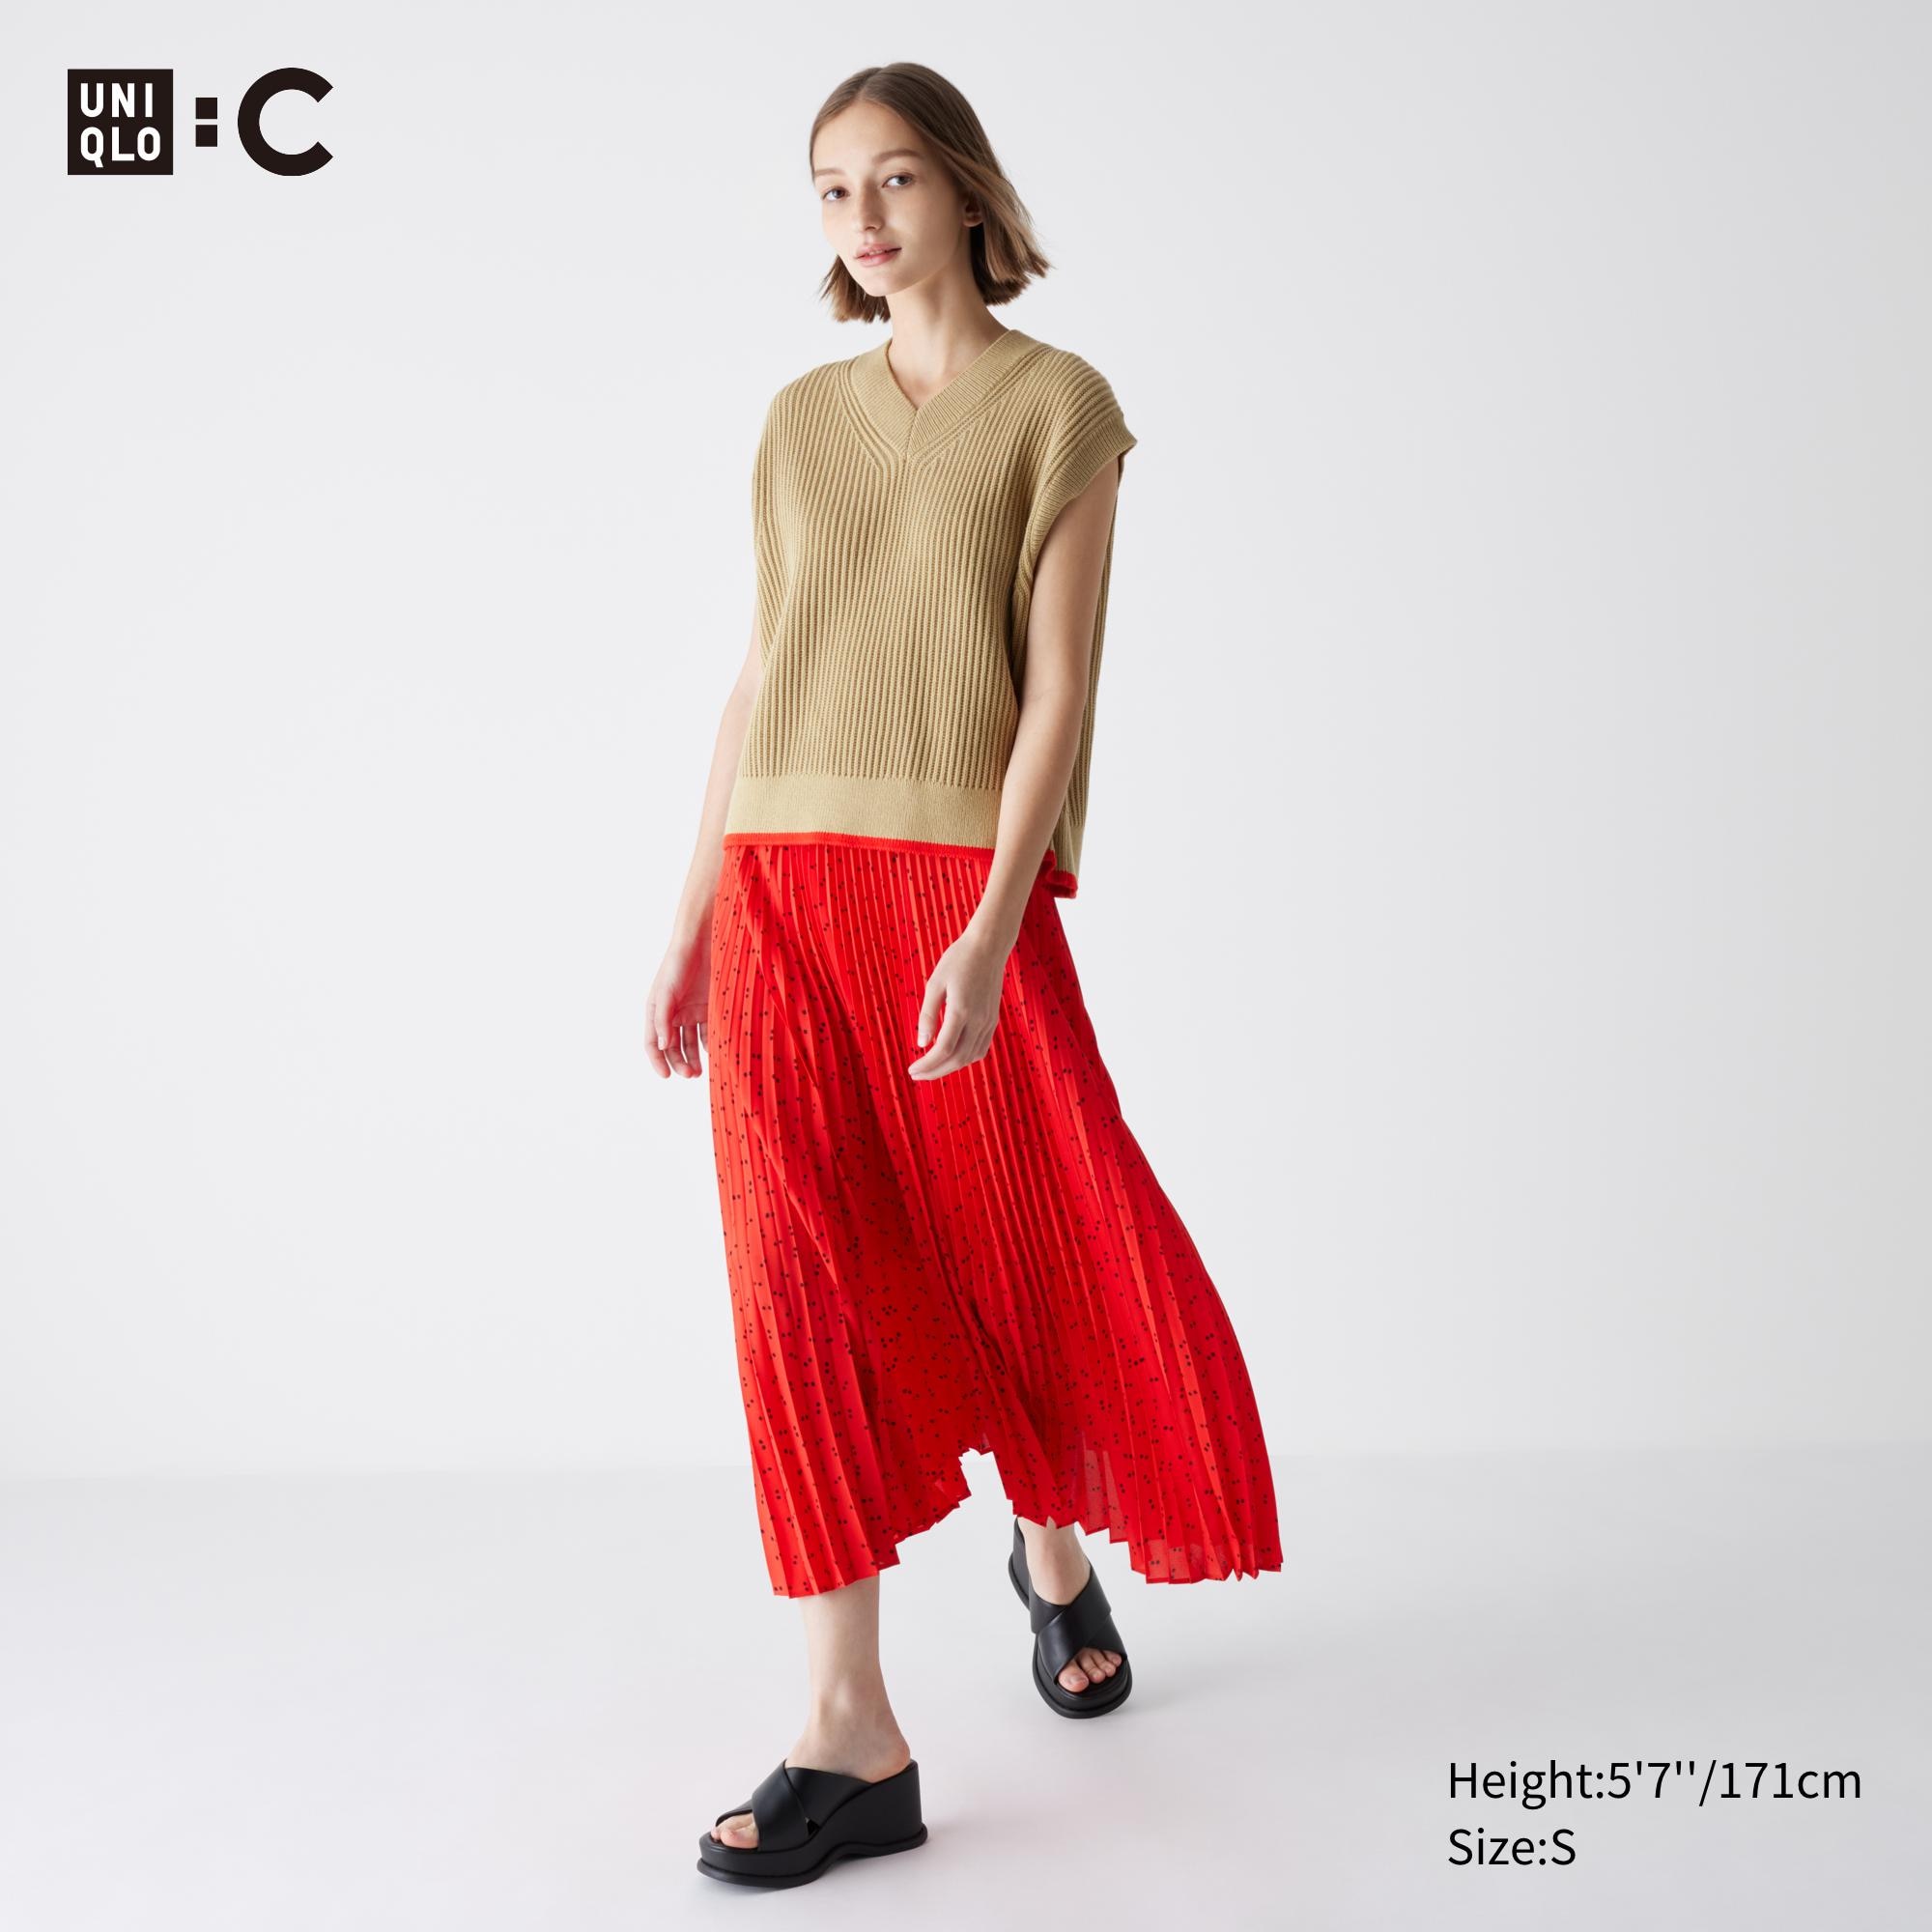 Check styling ideas for「SMOOTH COTTON RELAXED CREW NECK SWEATER、PLEATED  SKIRT」